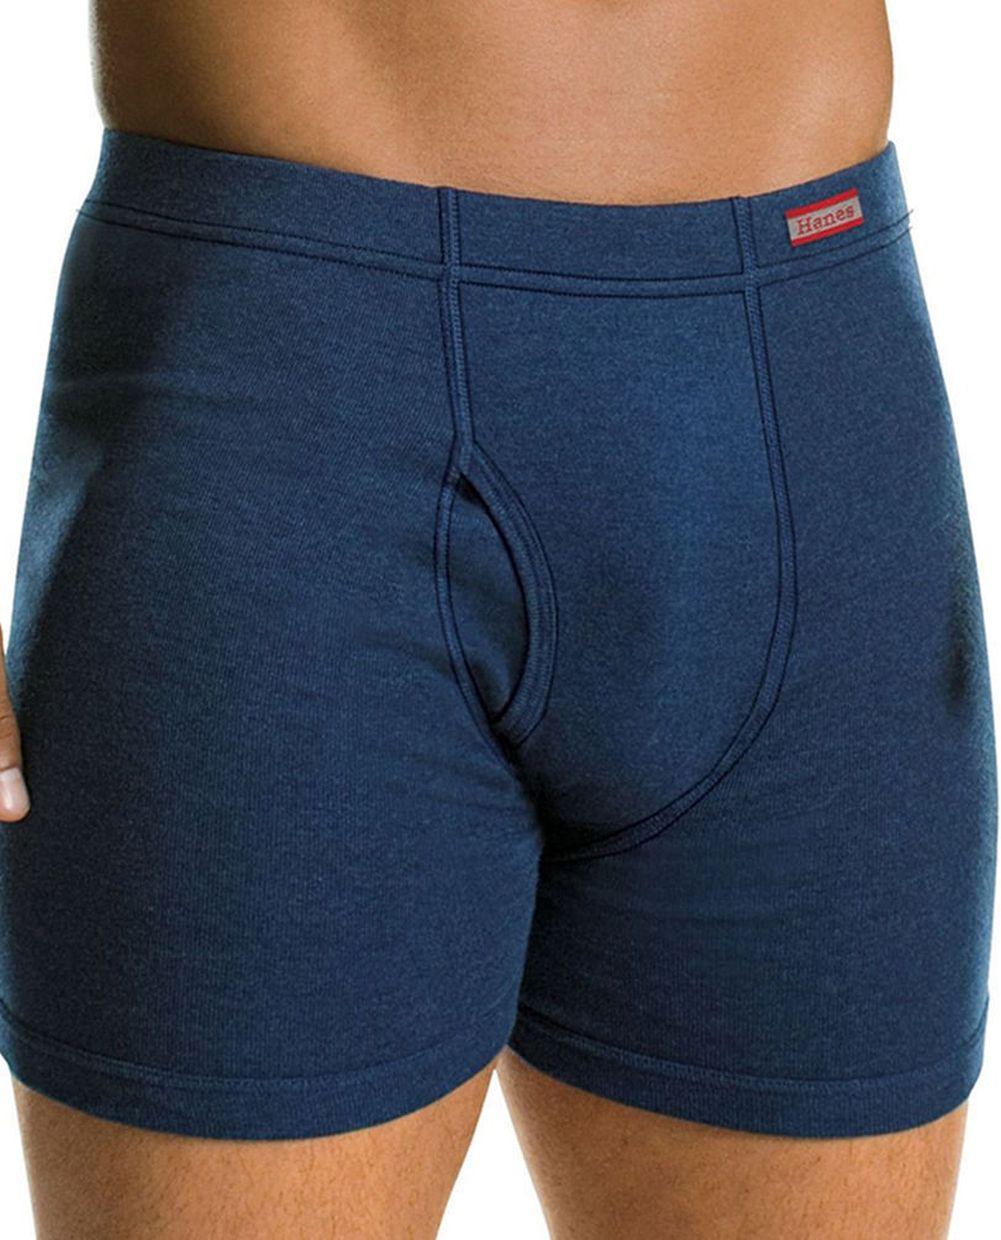 Hanes Men S Tagless Boxer Brief With Comfortsoft Waistband